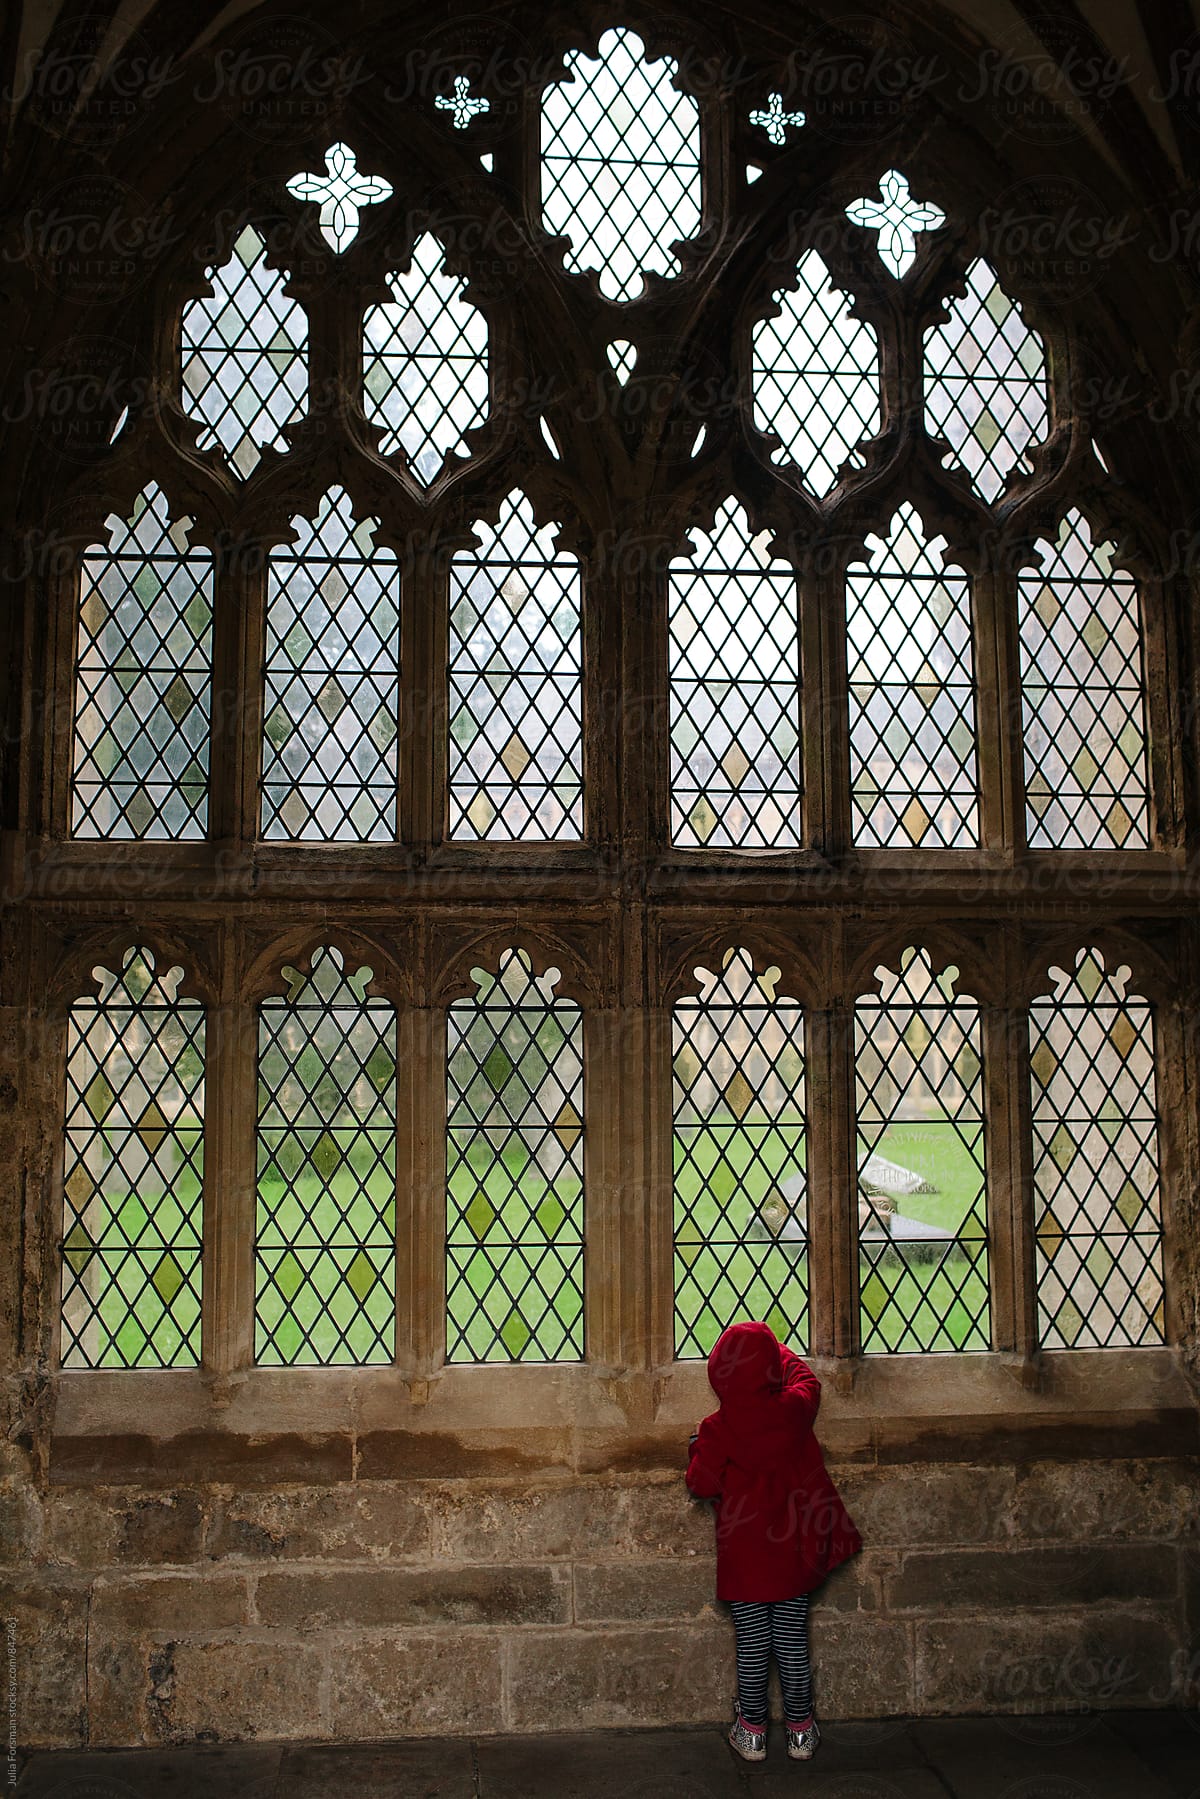 Little girl looking out of a section of a large medieval Gothic window in a cathedral cloister.